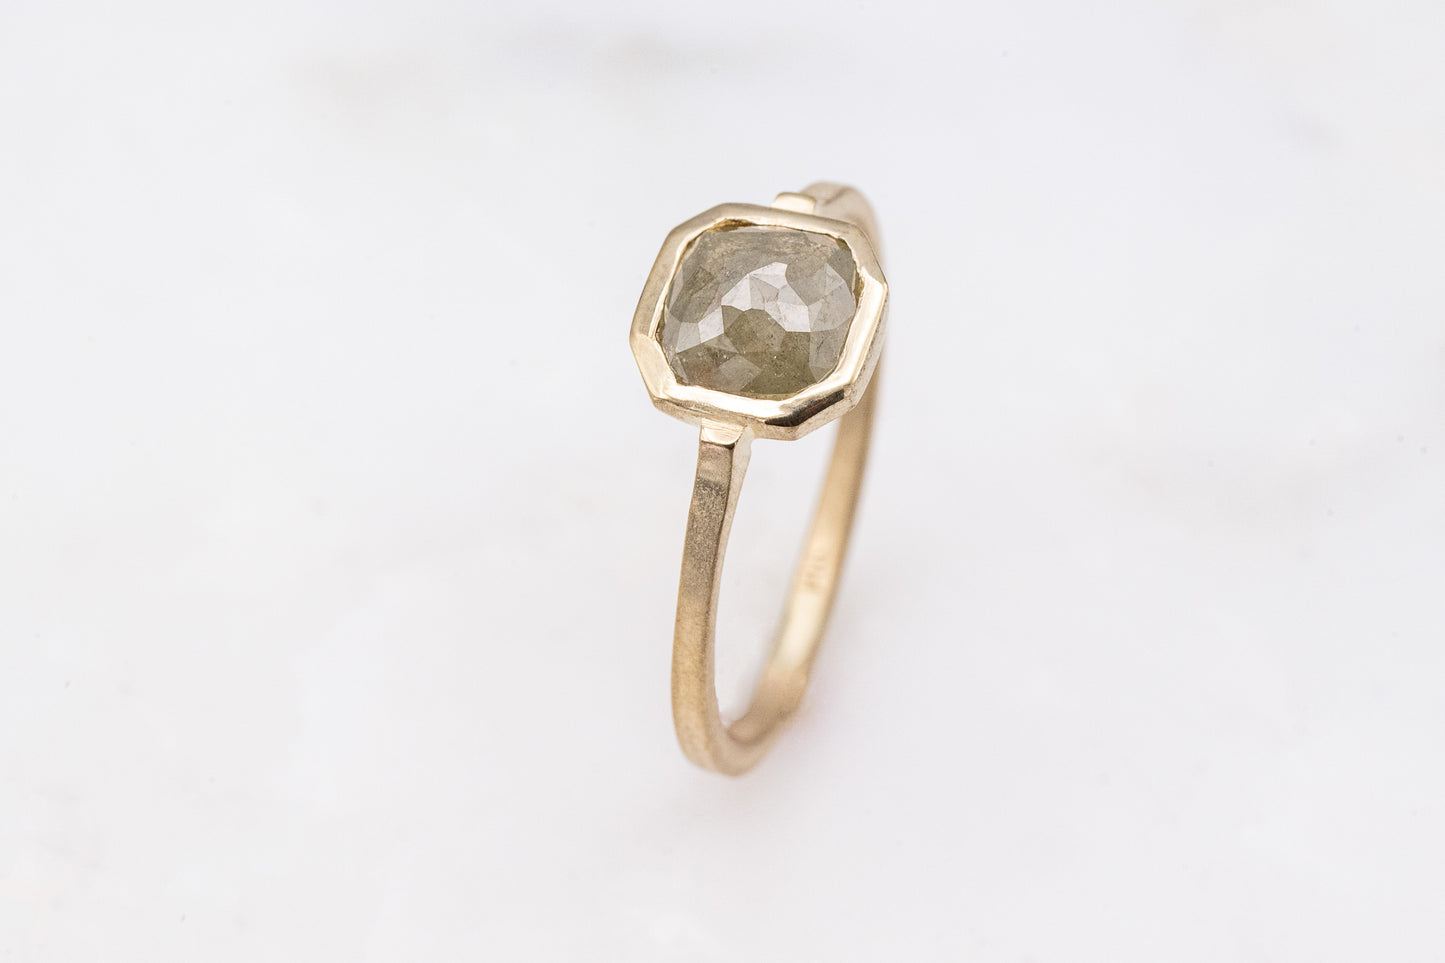 A Handmade Gray Diamond Ring in 14k Yellow Gold by Cassin Jewelry.